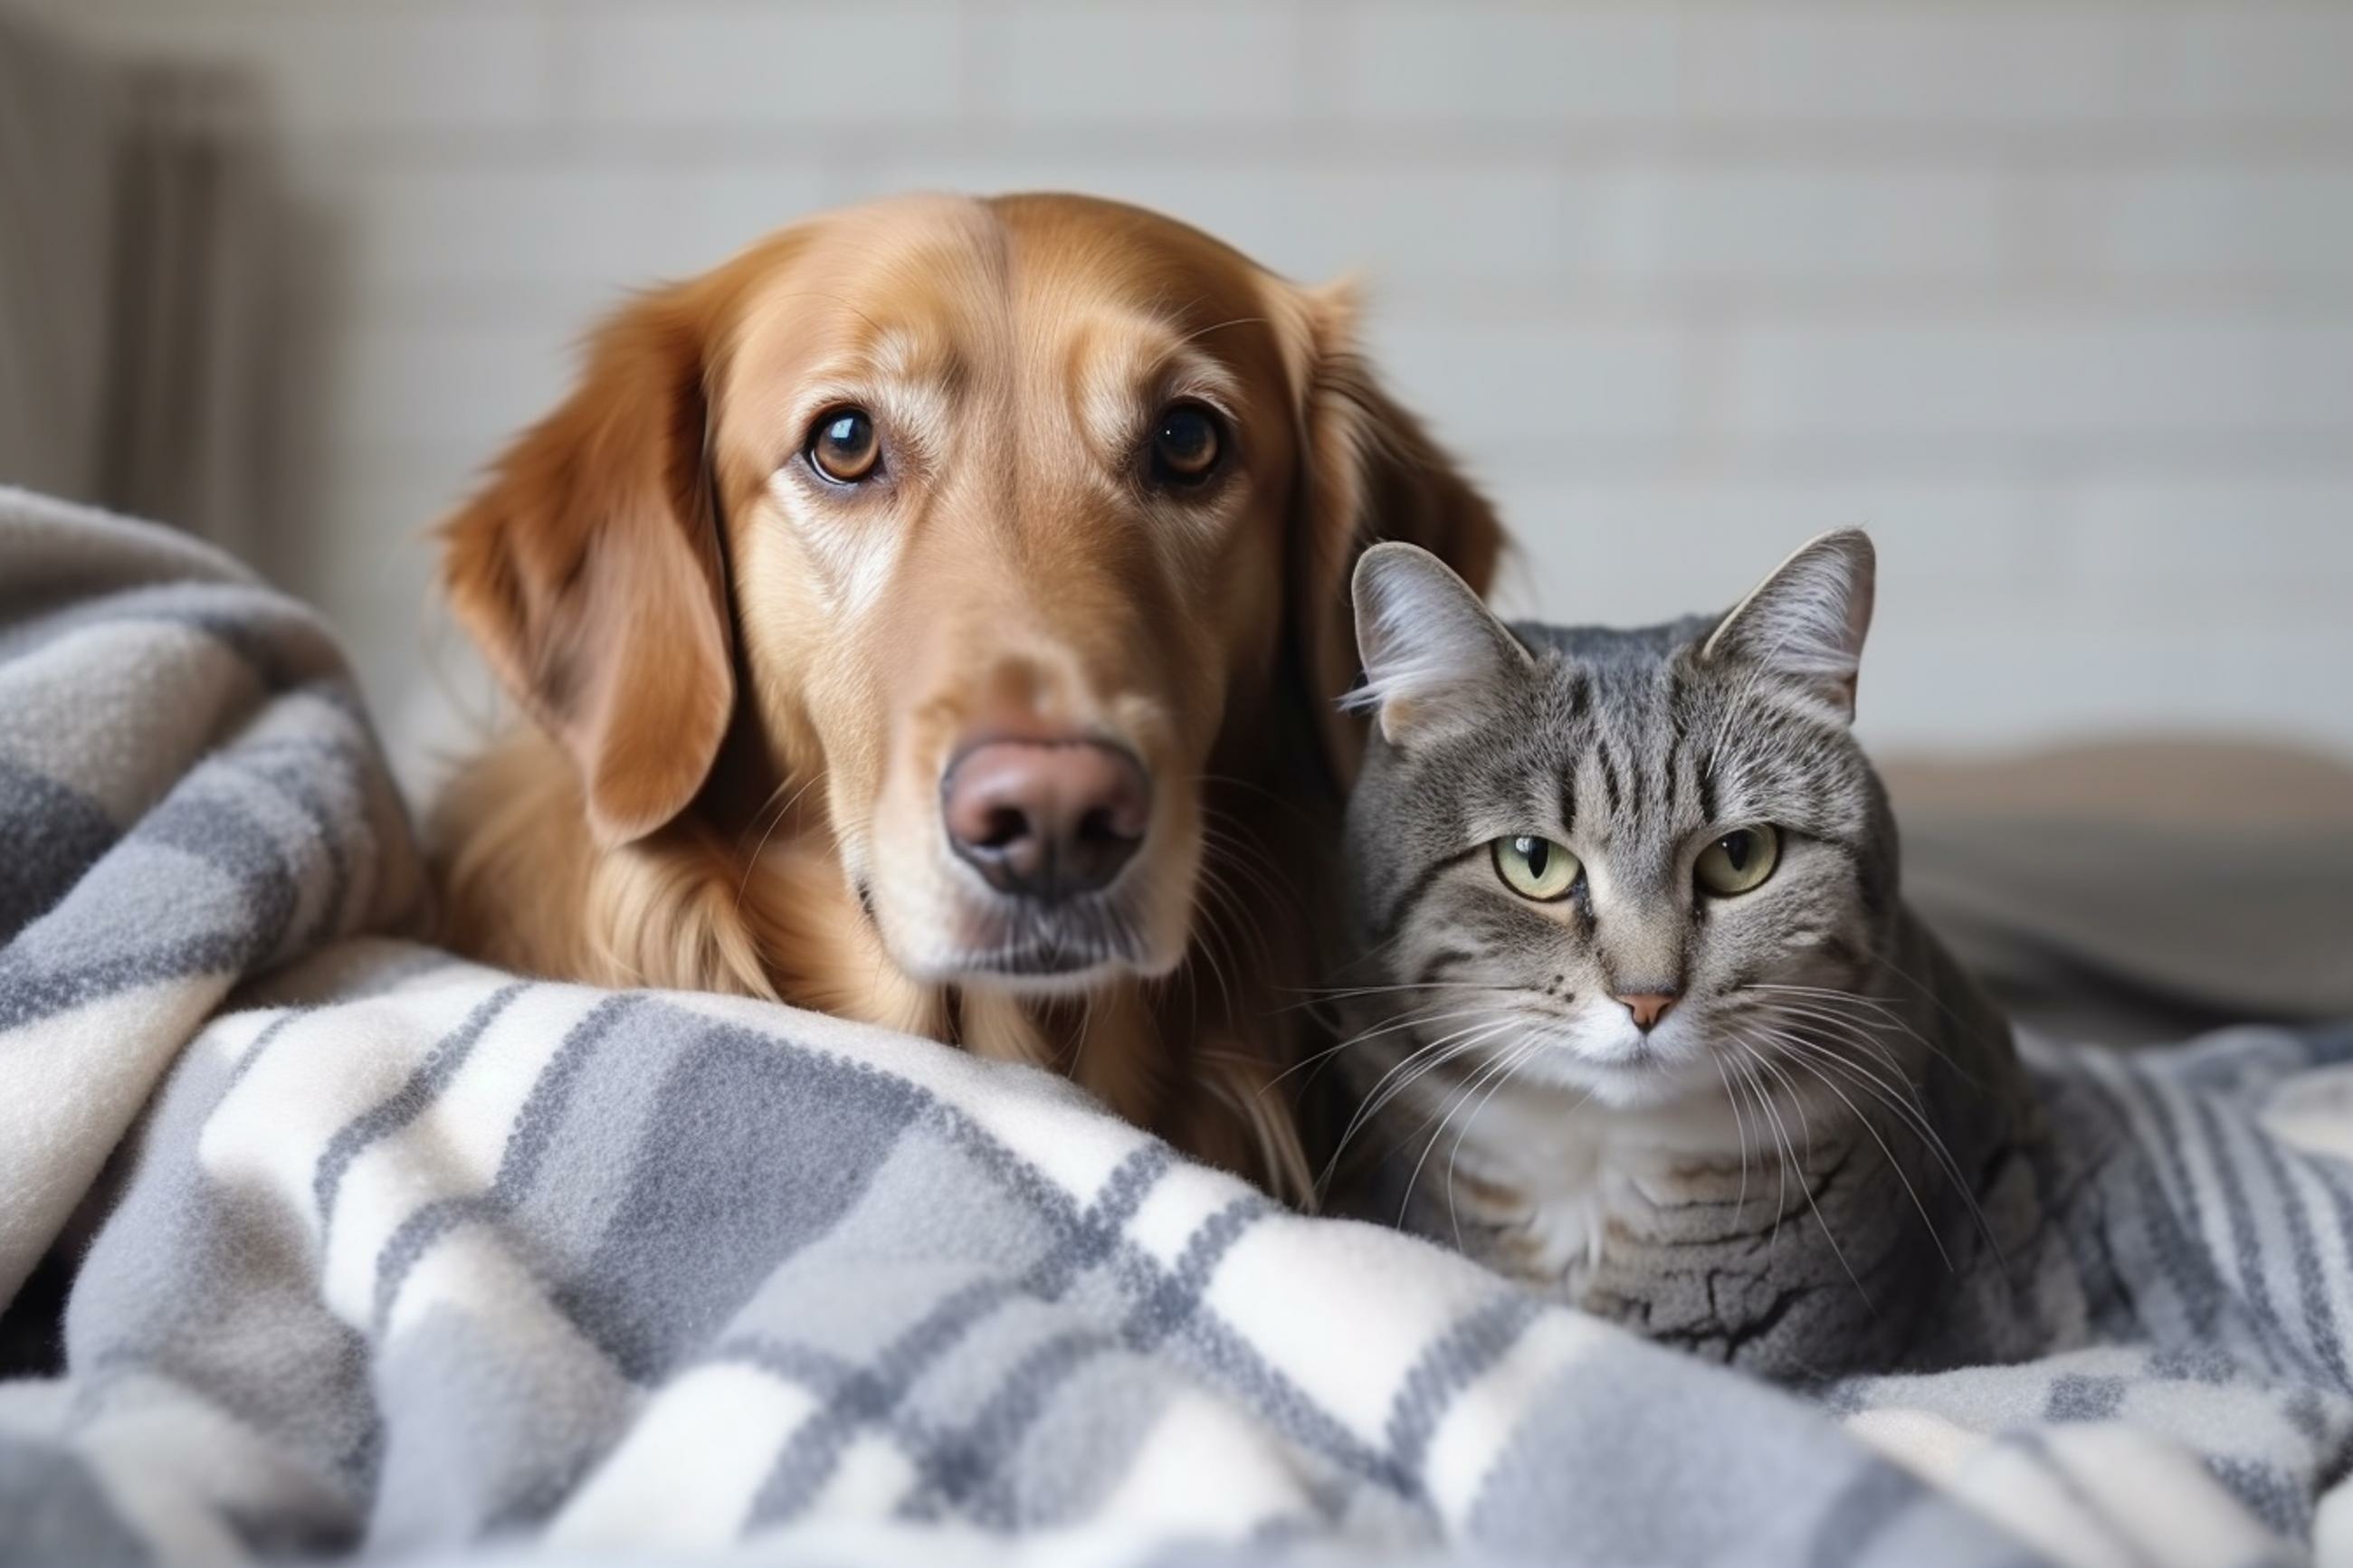 A dog and a cat feeling sick